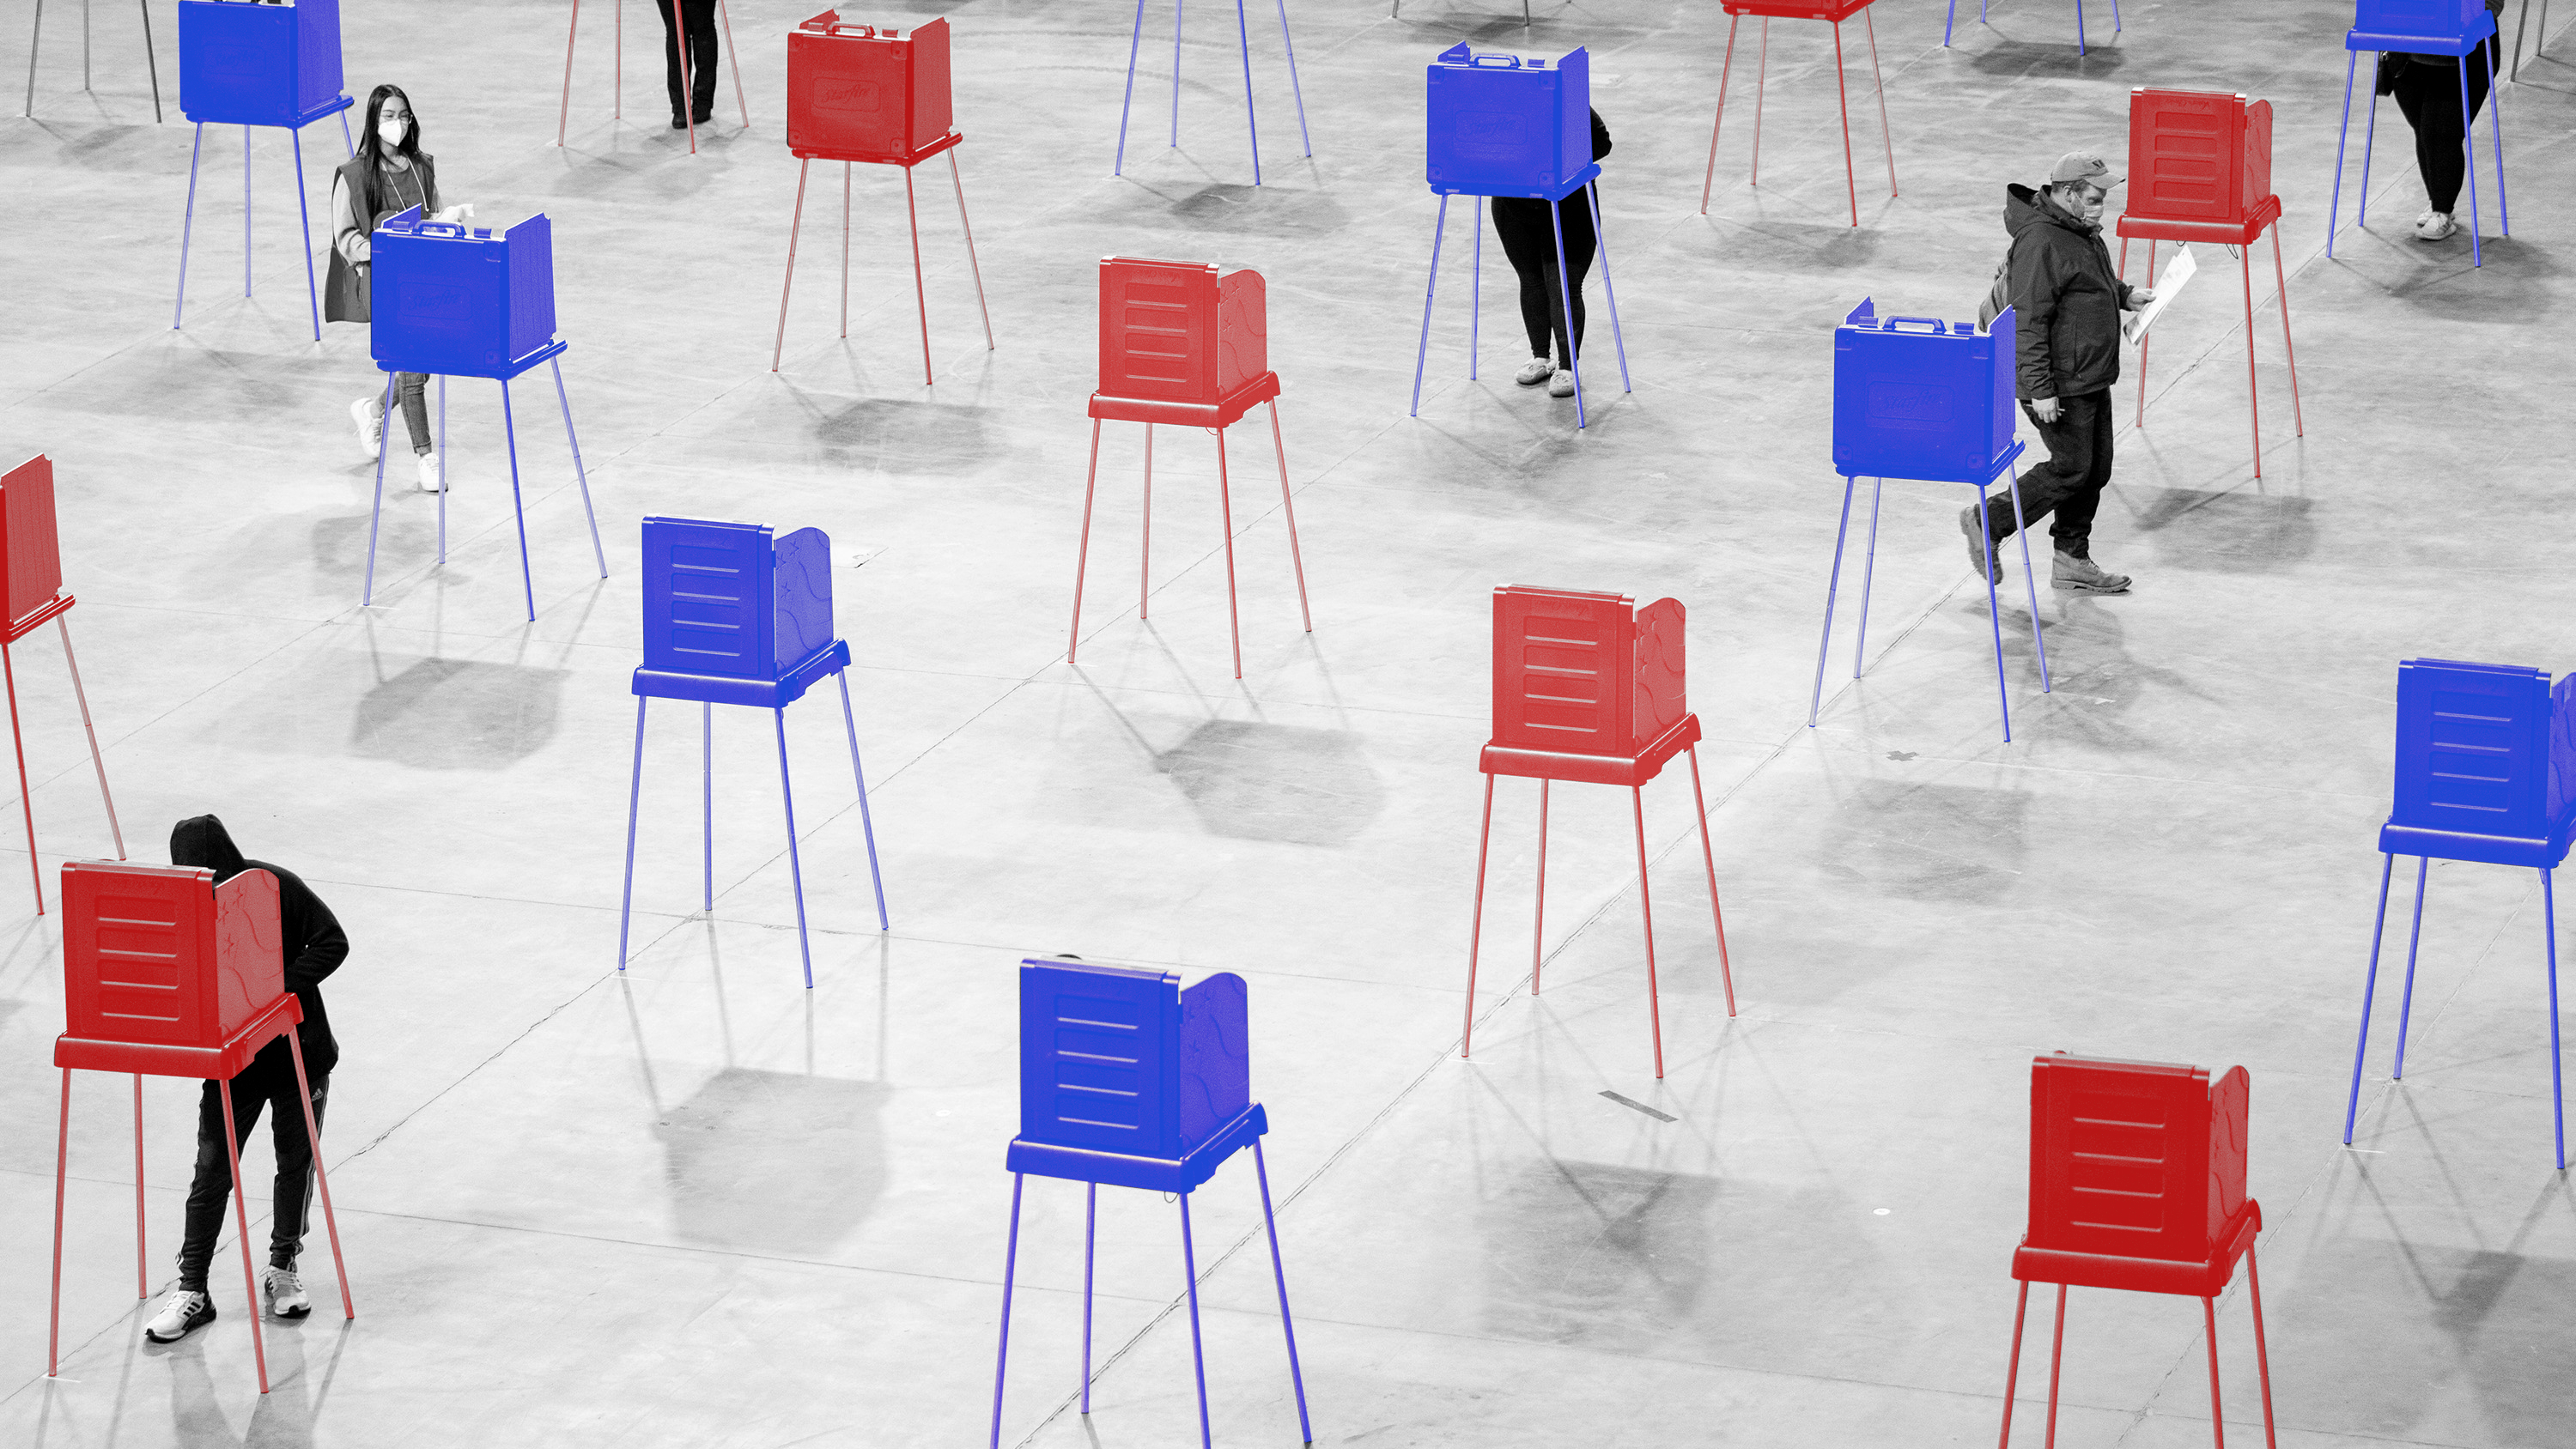 Everything you need to know ahead of the 2022 Midterm Elections